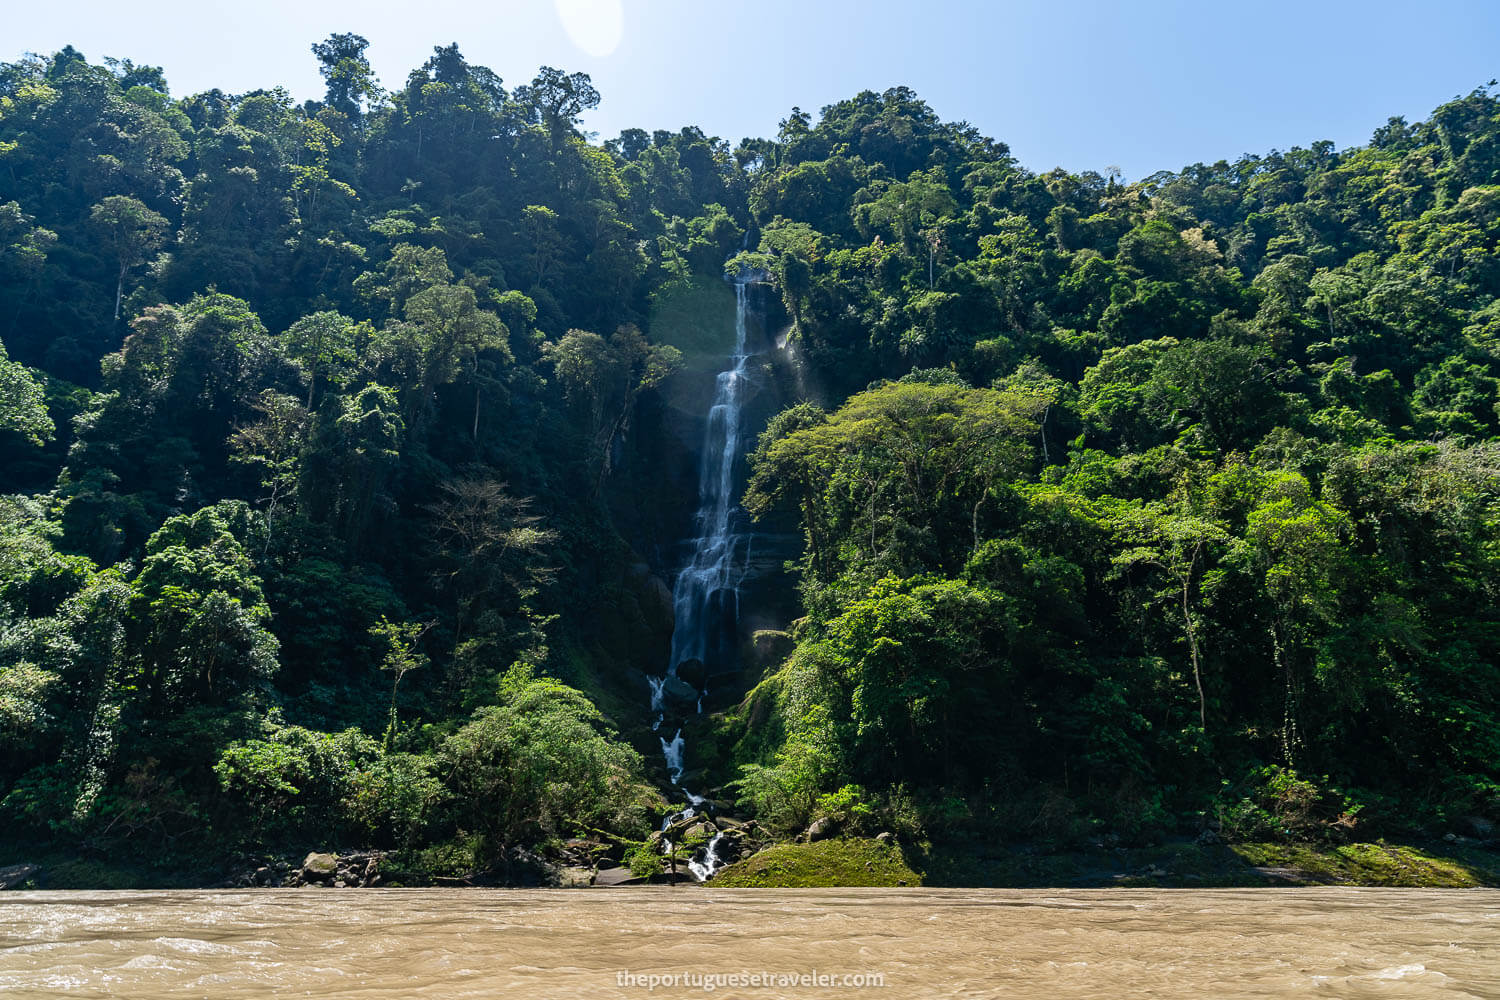 The waterfalls in the Santiago River